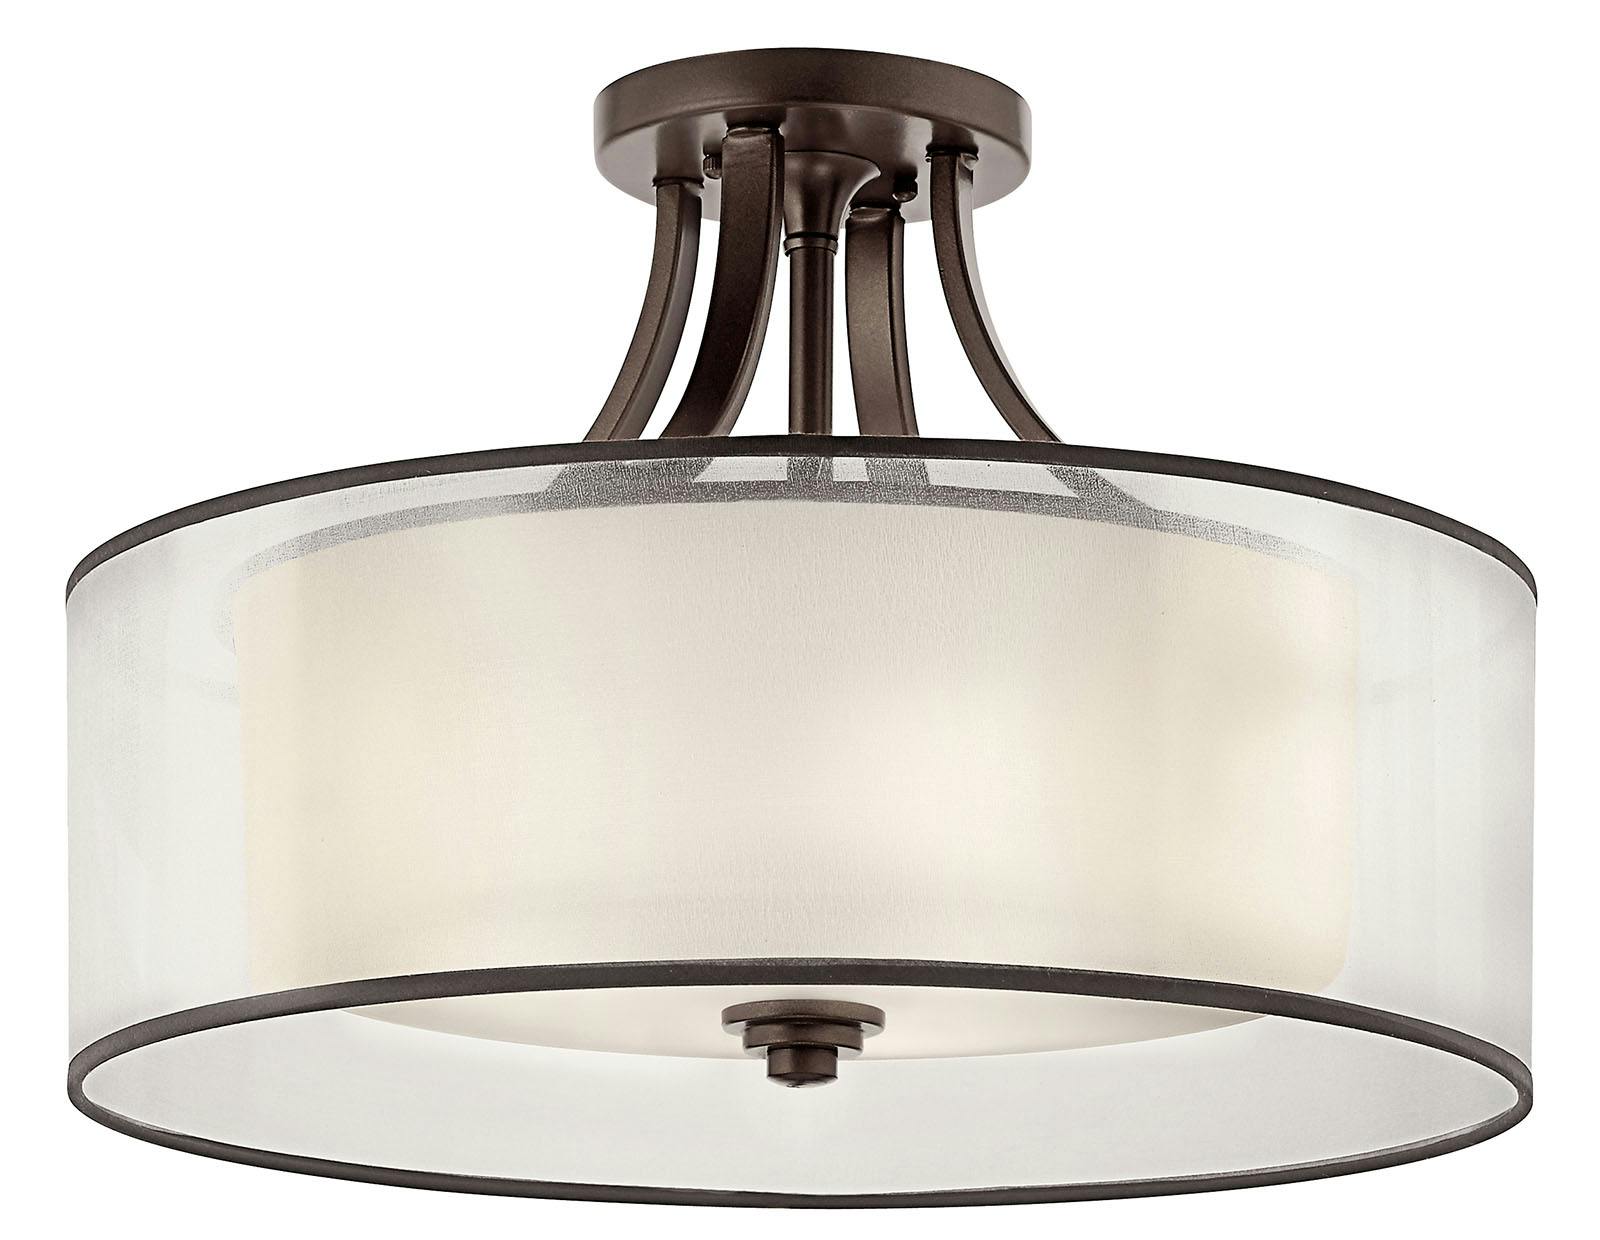 Lacey 20" 4 Light Semi Flush in Bronze on a white background